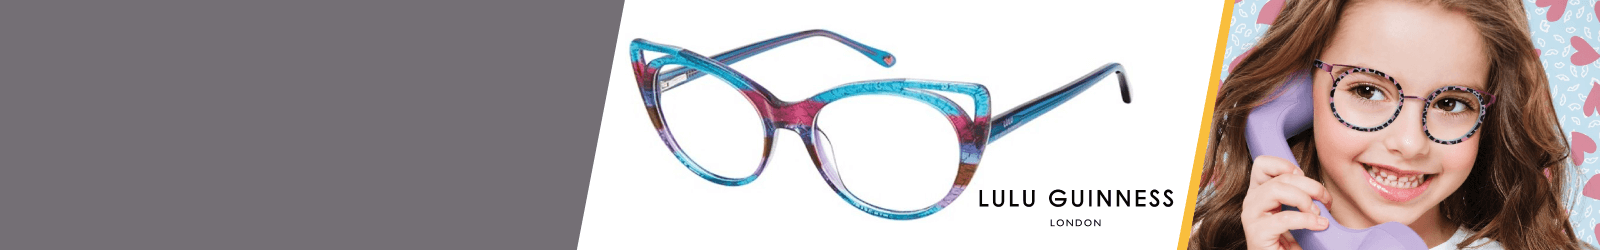 Prints Lulu Guinness Kids Glasses from 2 to 4-year-old